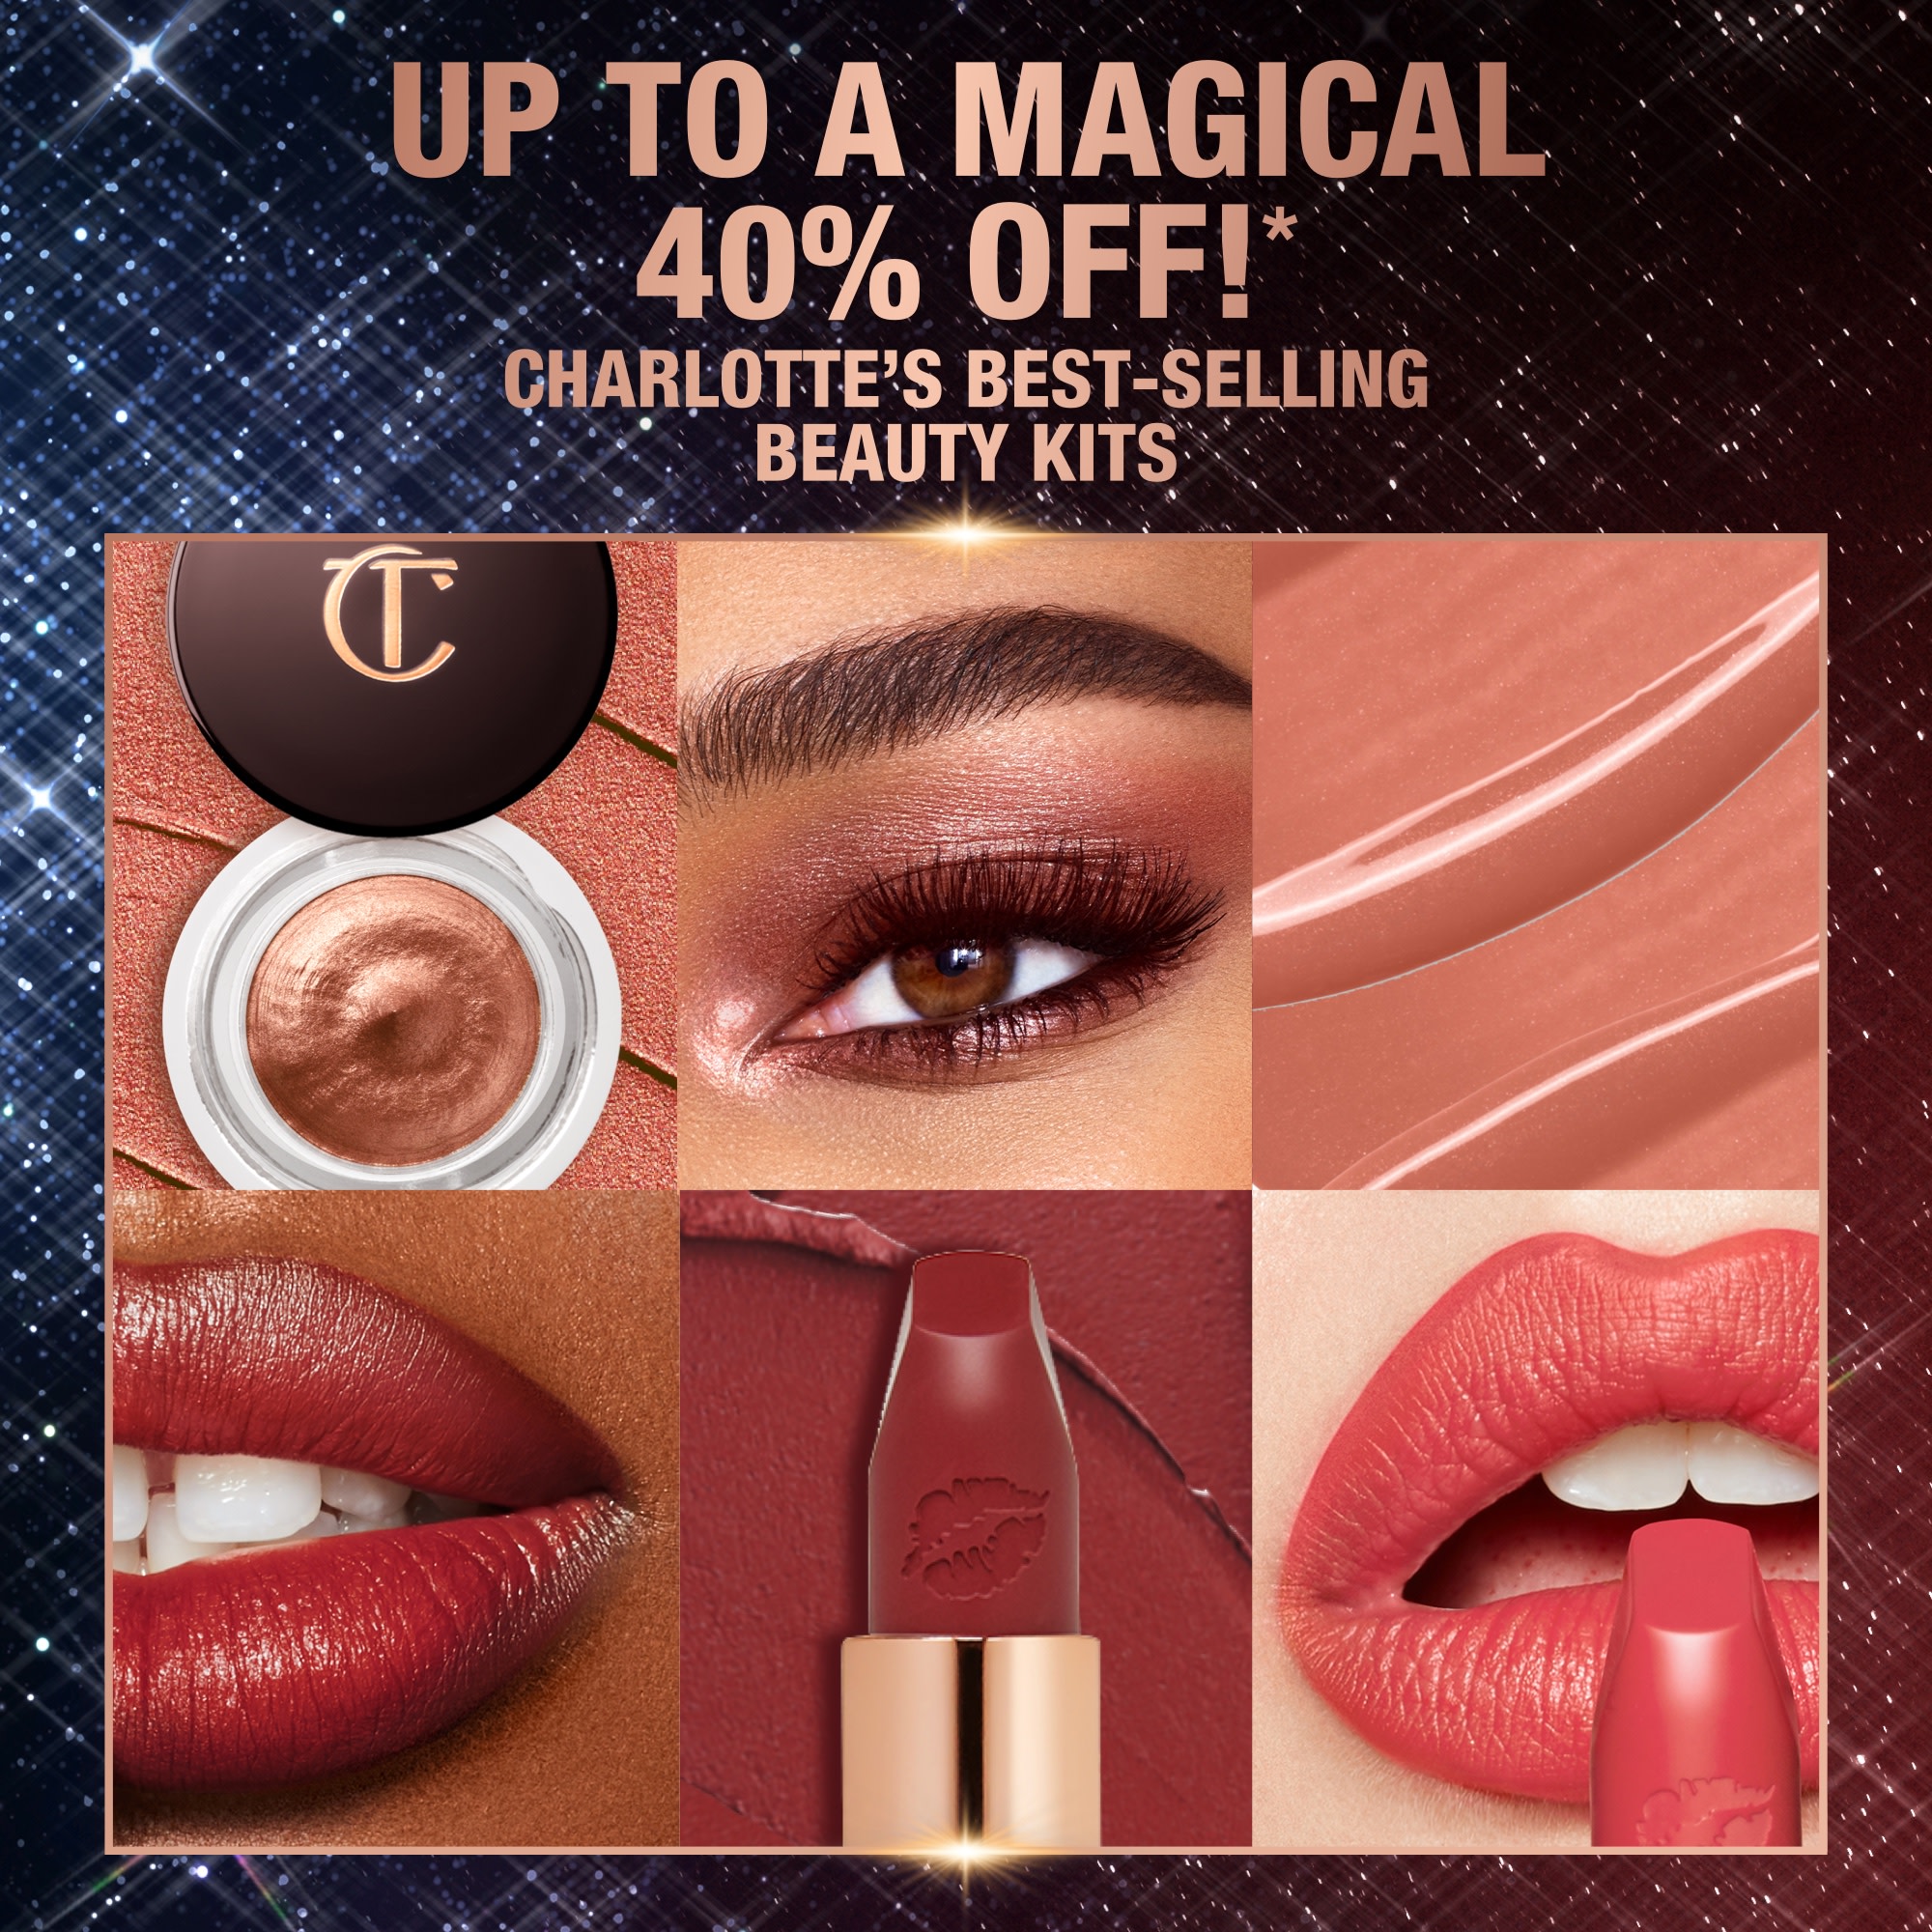 Up to a magical 40% off! Charlotte's best-selling beauty kits with collage of eyeshadow and lipstick